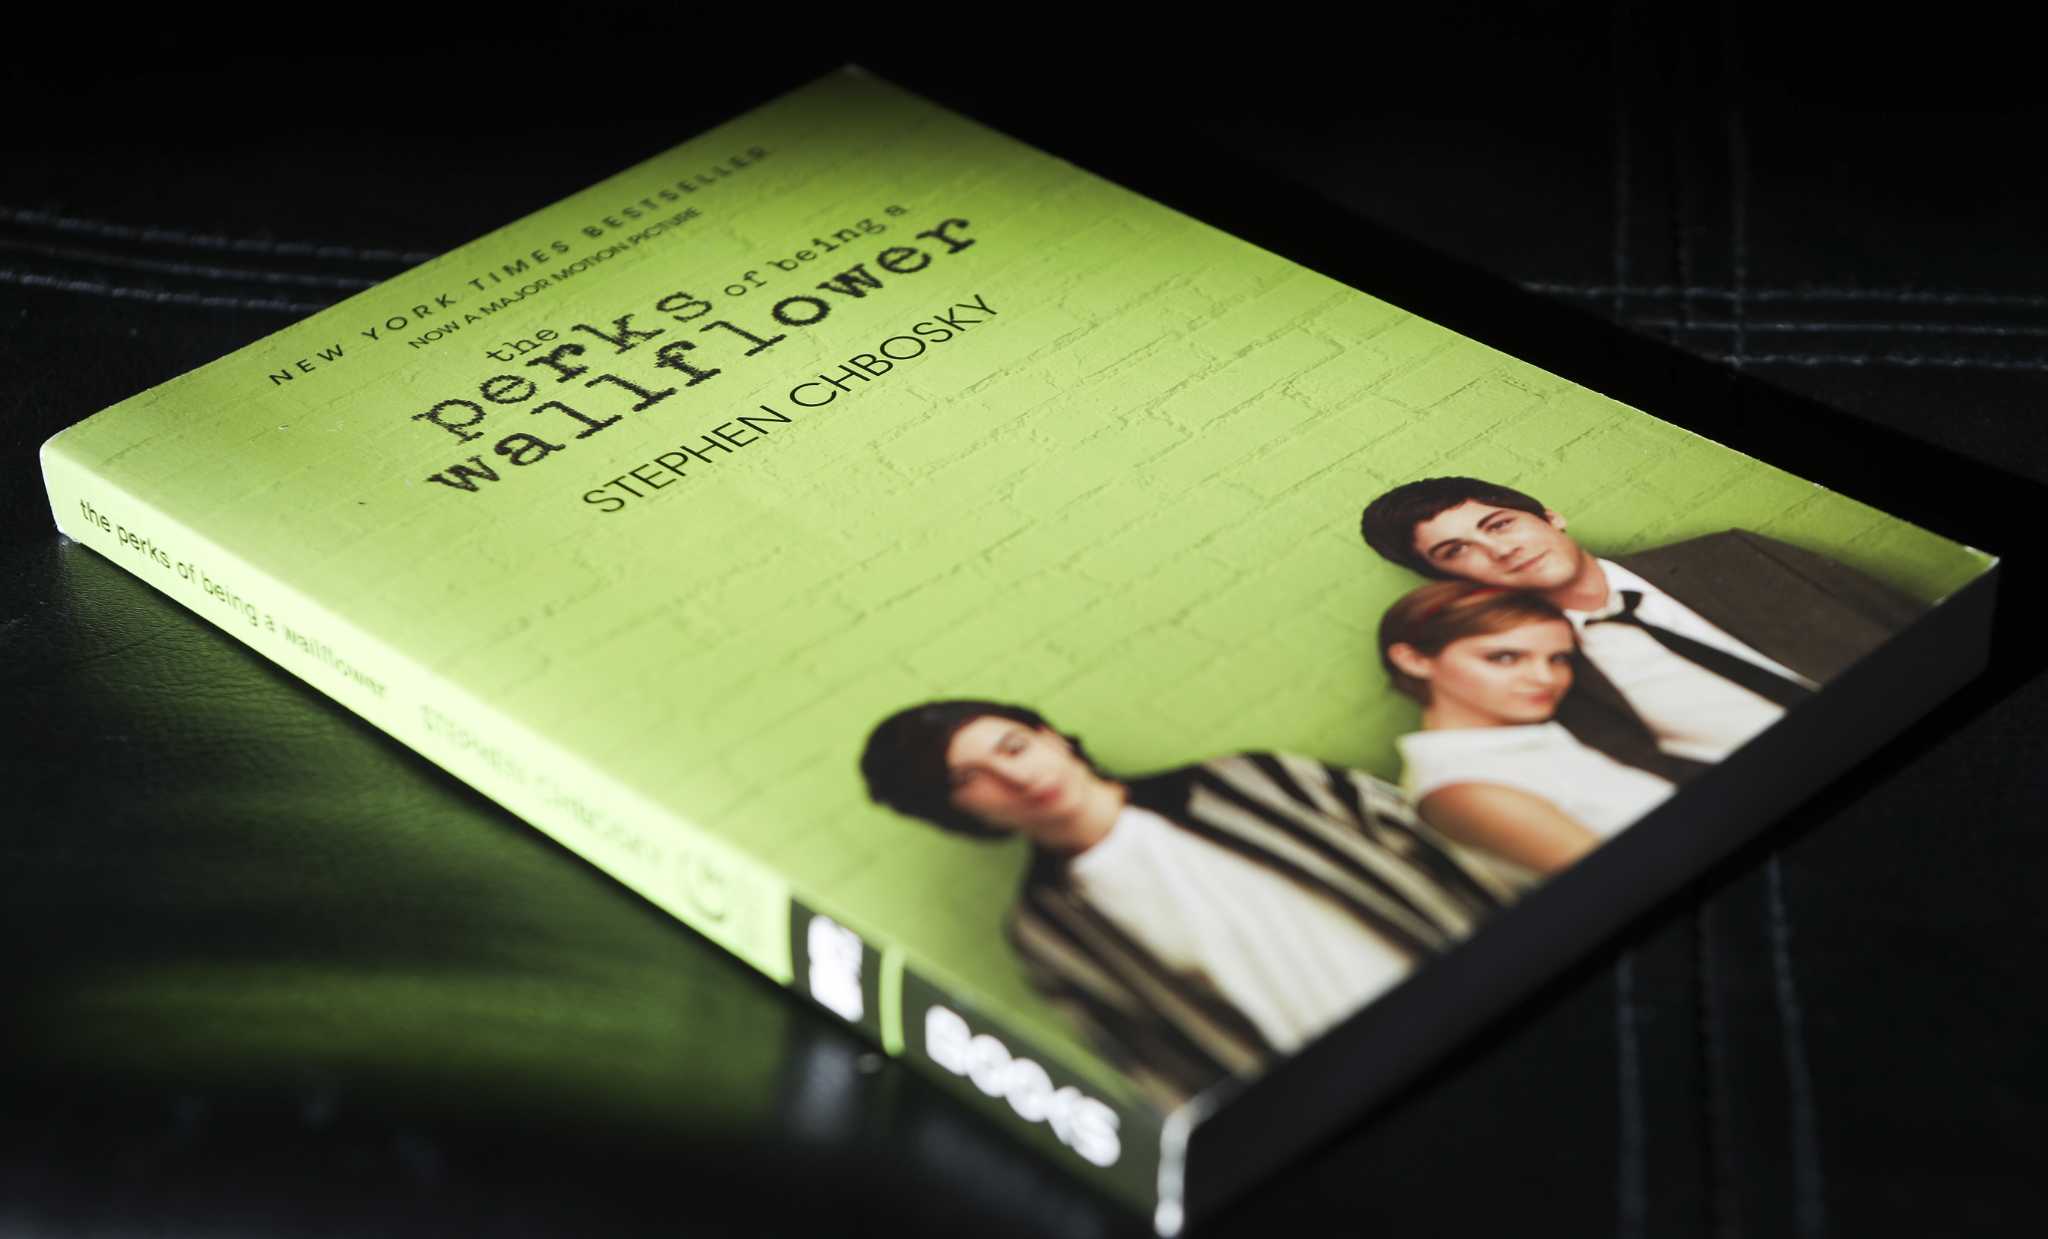 3. "Perks of Being a Wallflower" Book Cover Nail Art - wide 6